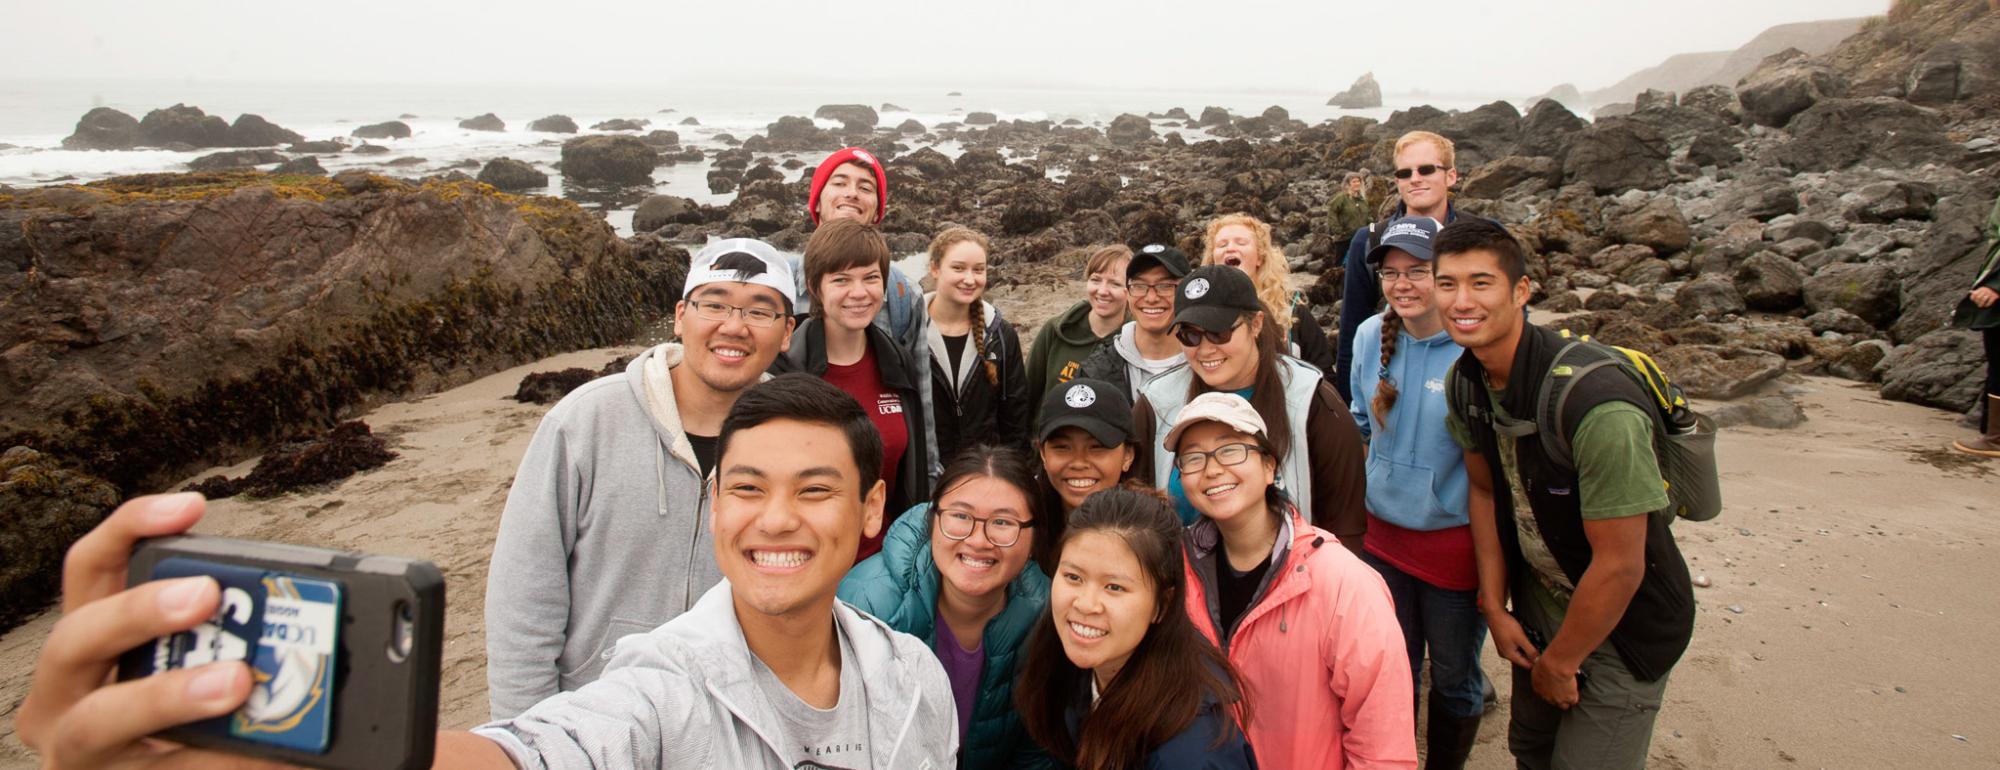 A group of students taking a selfie on a coastal beach.